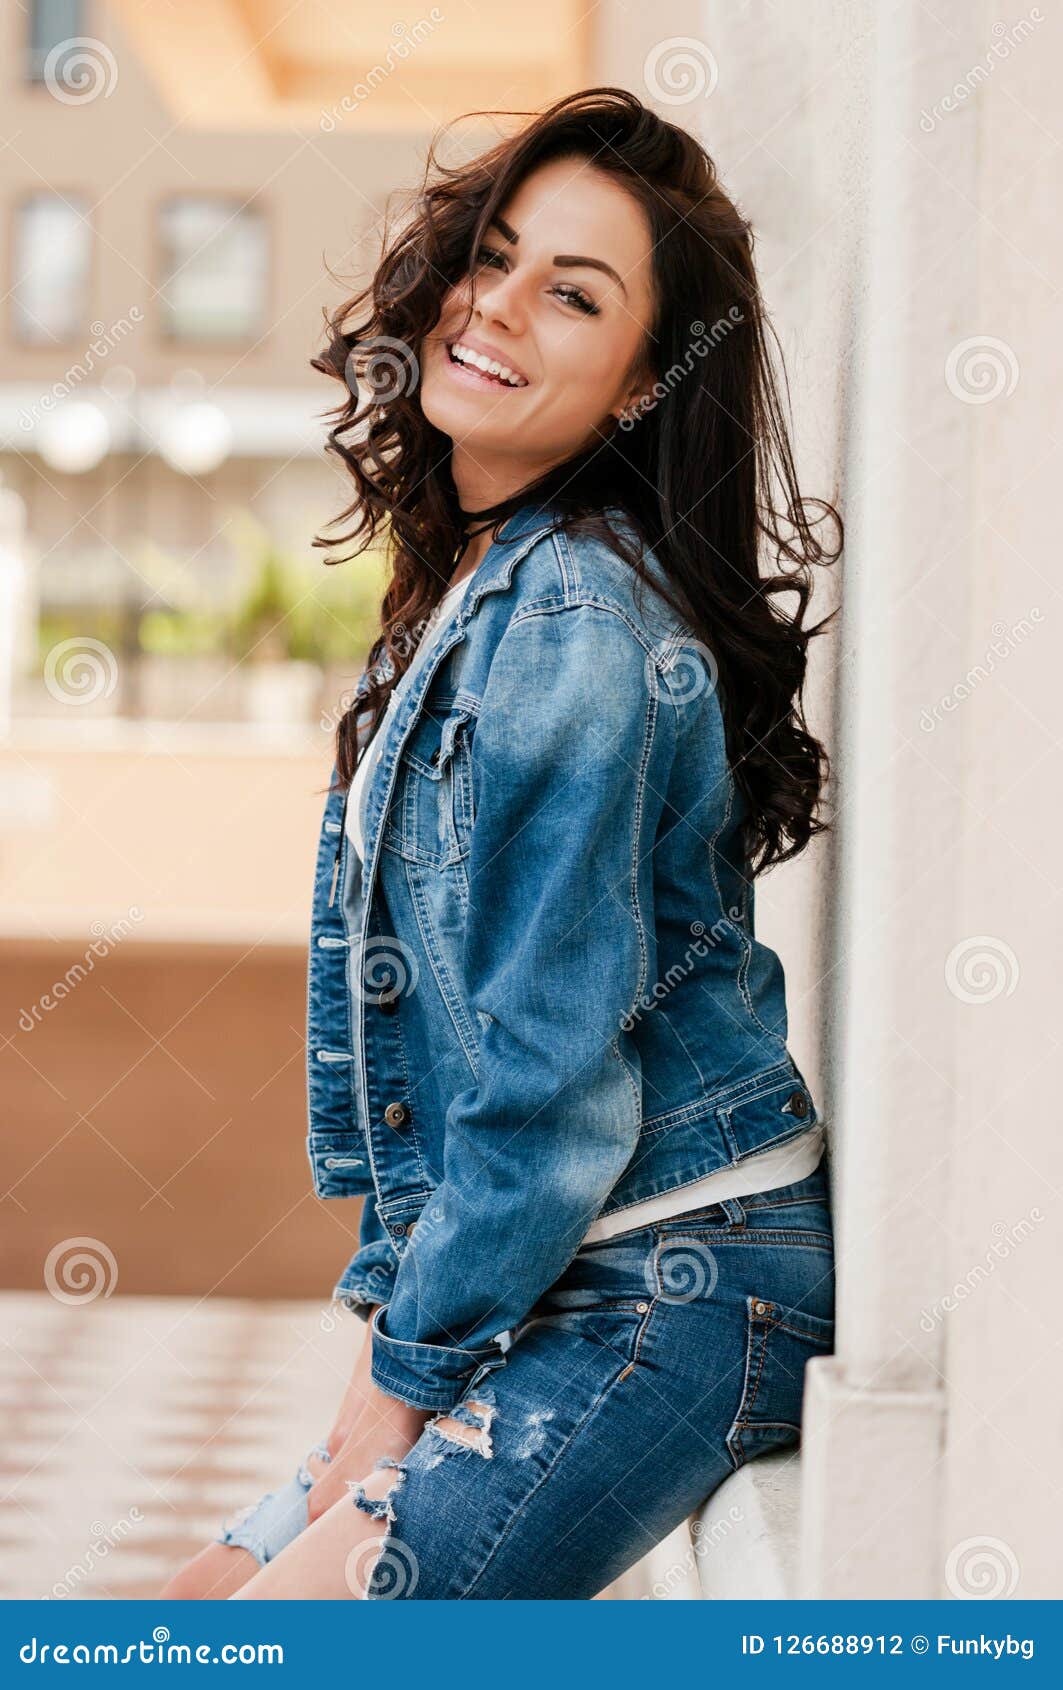 Woman with Brown Hair in Denim Jacket Posing on Camera Stock Photo ...